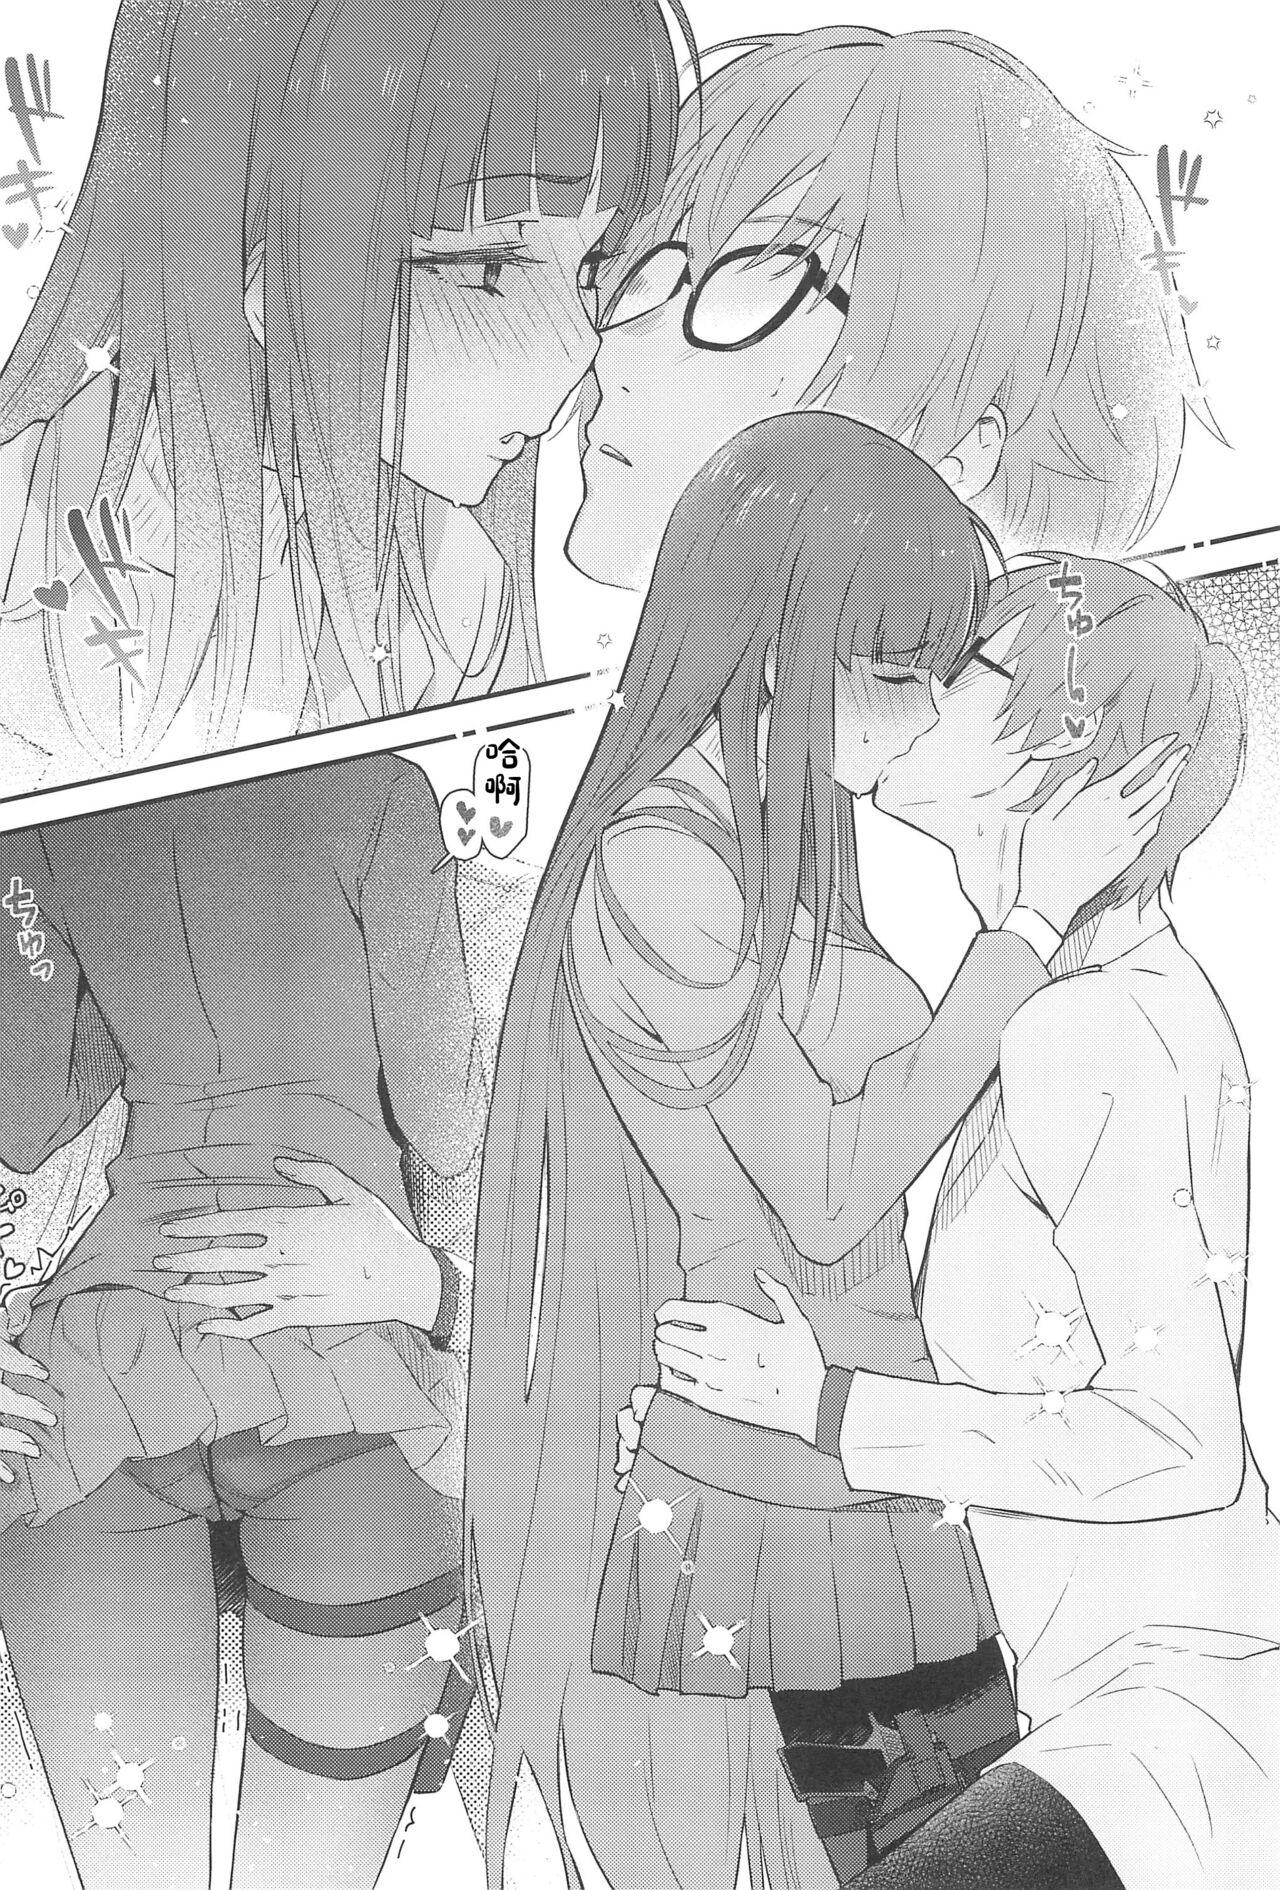 Tiny Girl (C102) [Shiro no Ie (Yochiki)] Rio-chan wa Otosaretai. - Rio Want To Be Fall in Love (Blue Archive) - Blue archive Gay Trimmed - Page 8